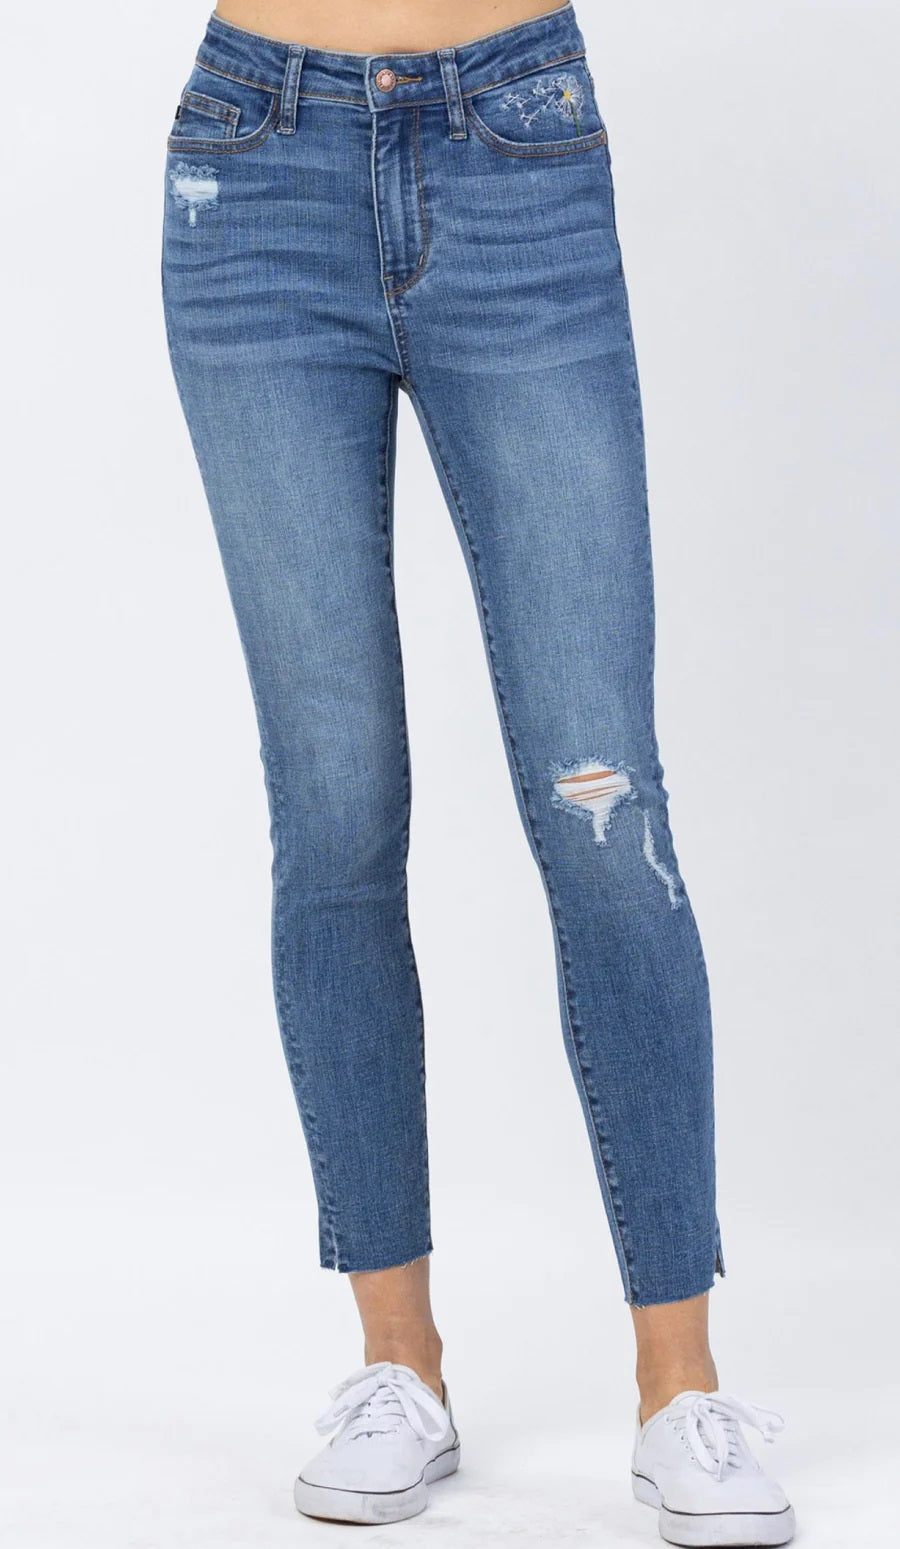 Curvy Dandy Wishes Embroidered Skinny Leg